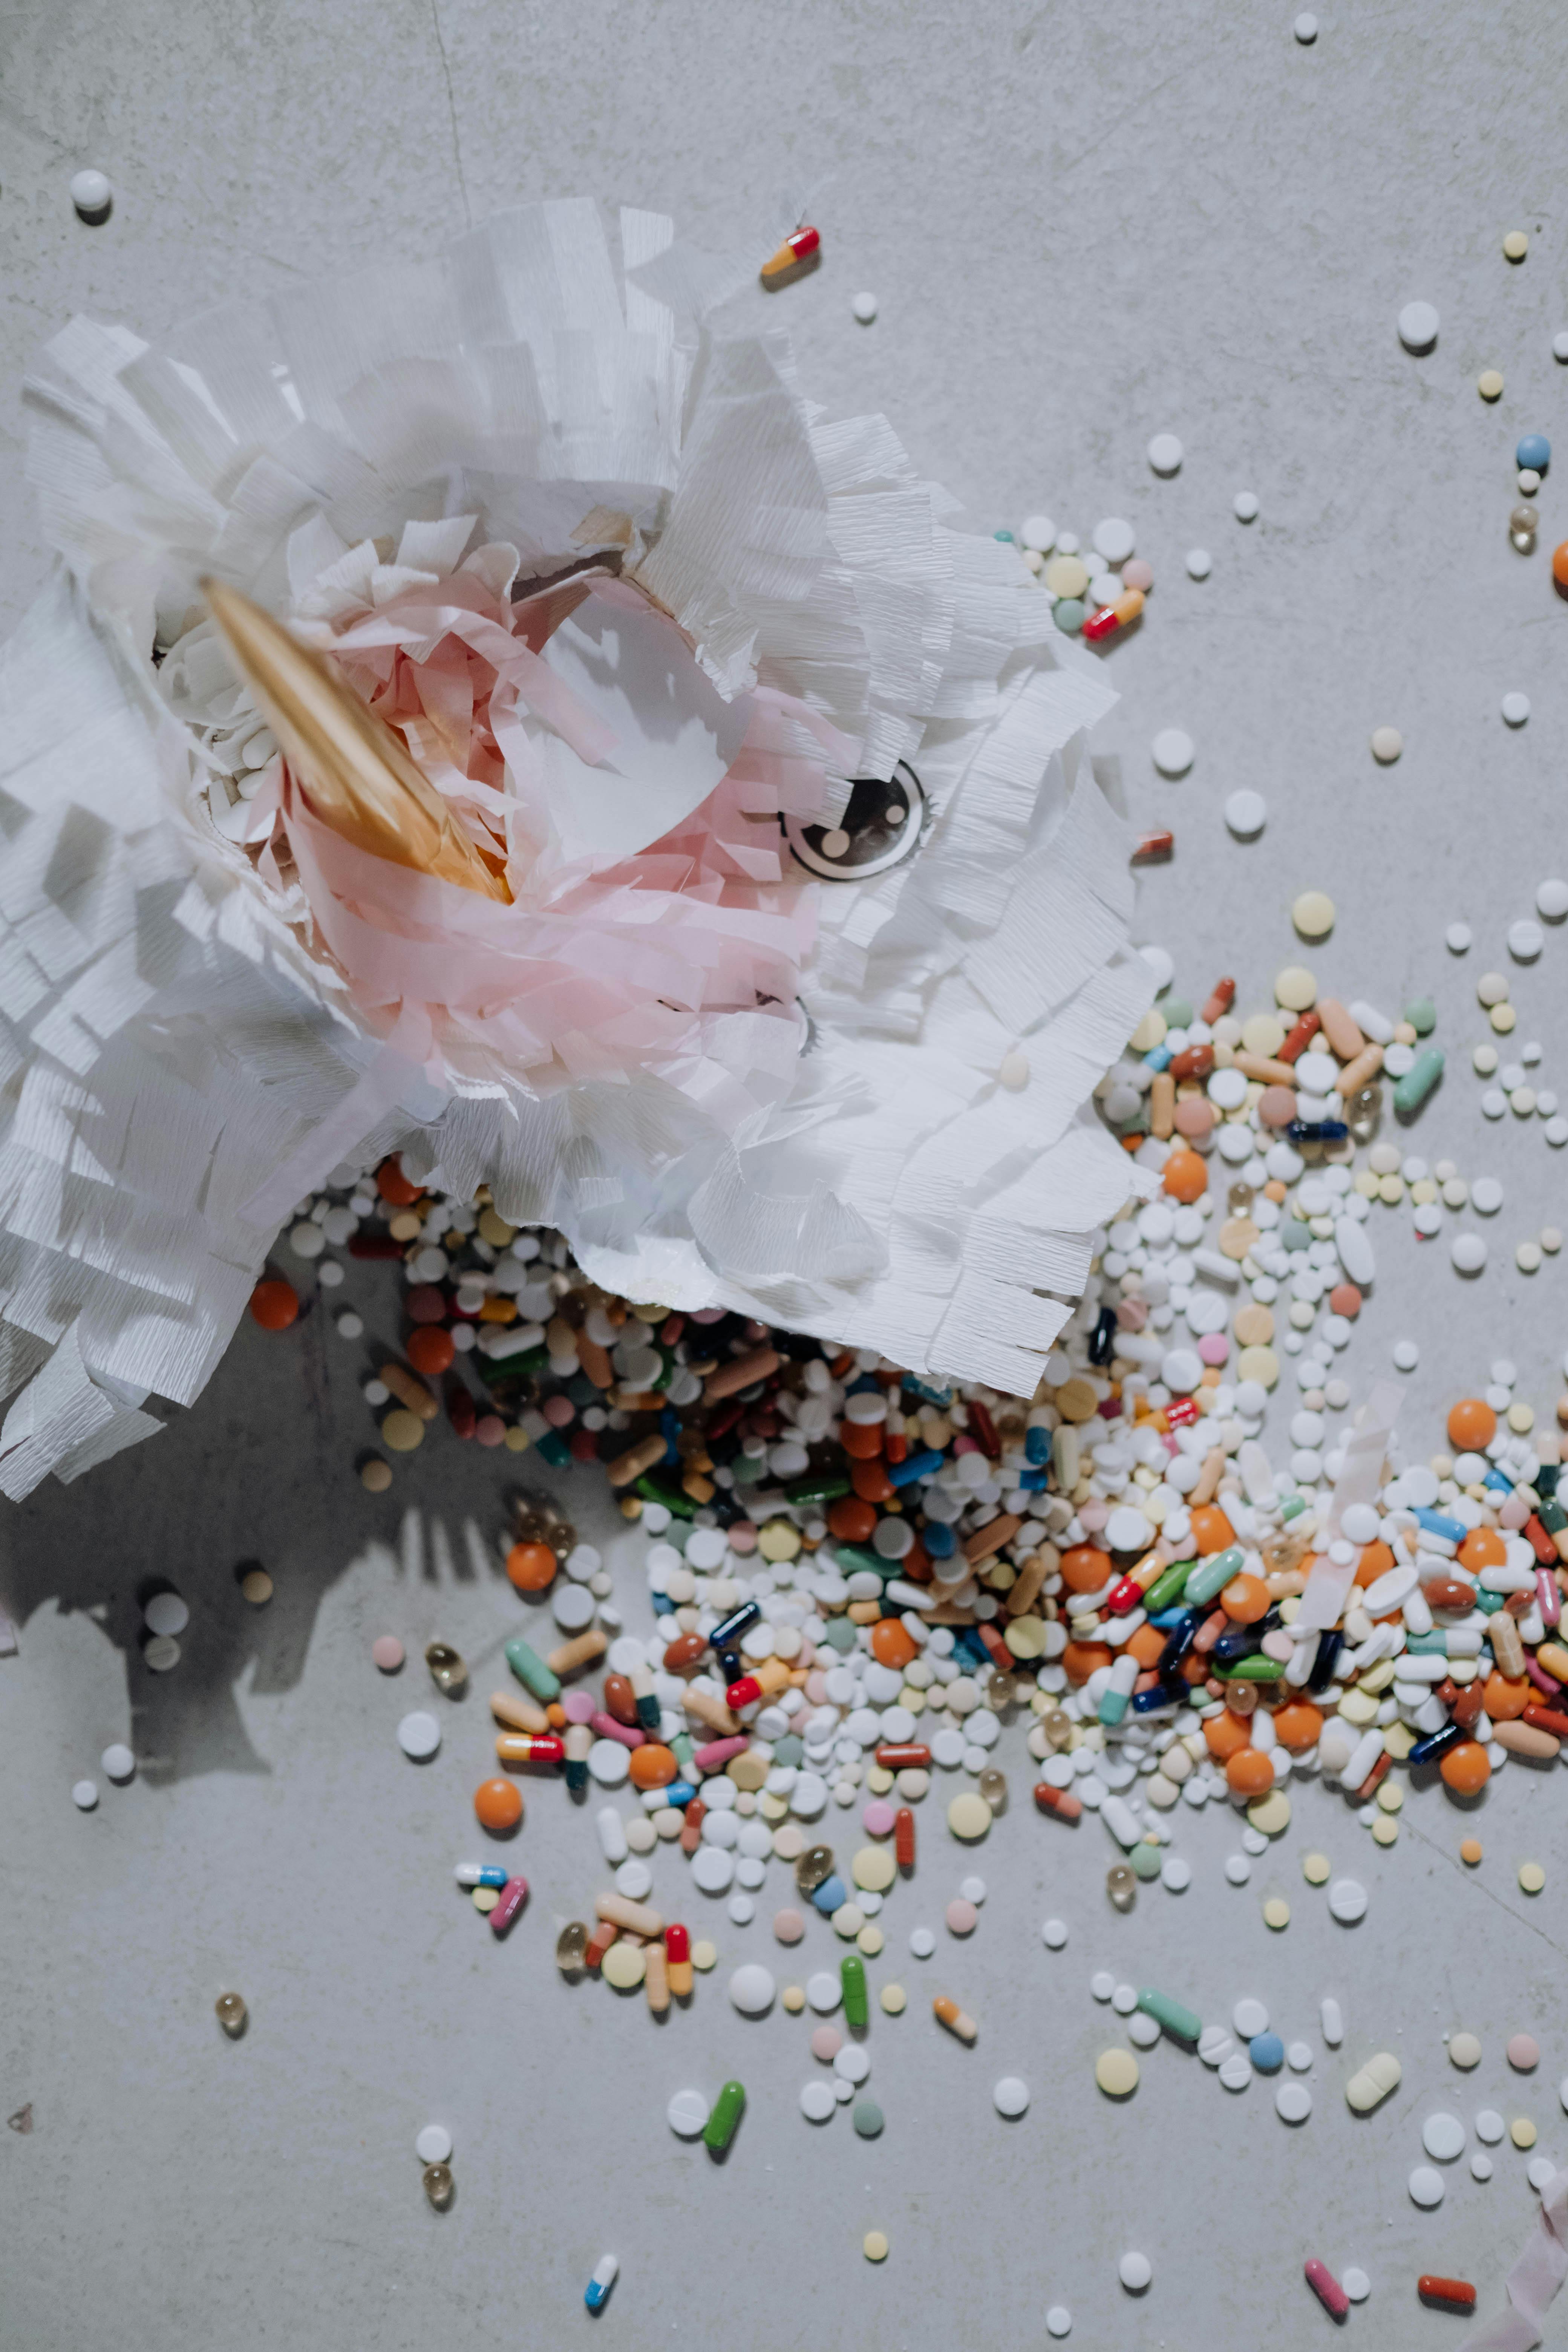 paper decoration and variety of pills scattered on the surface